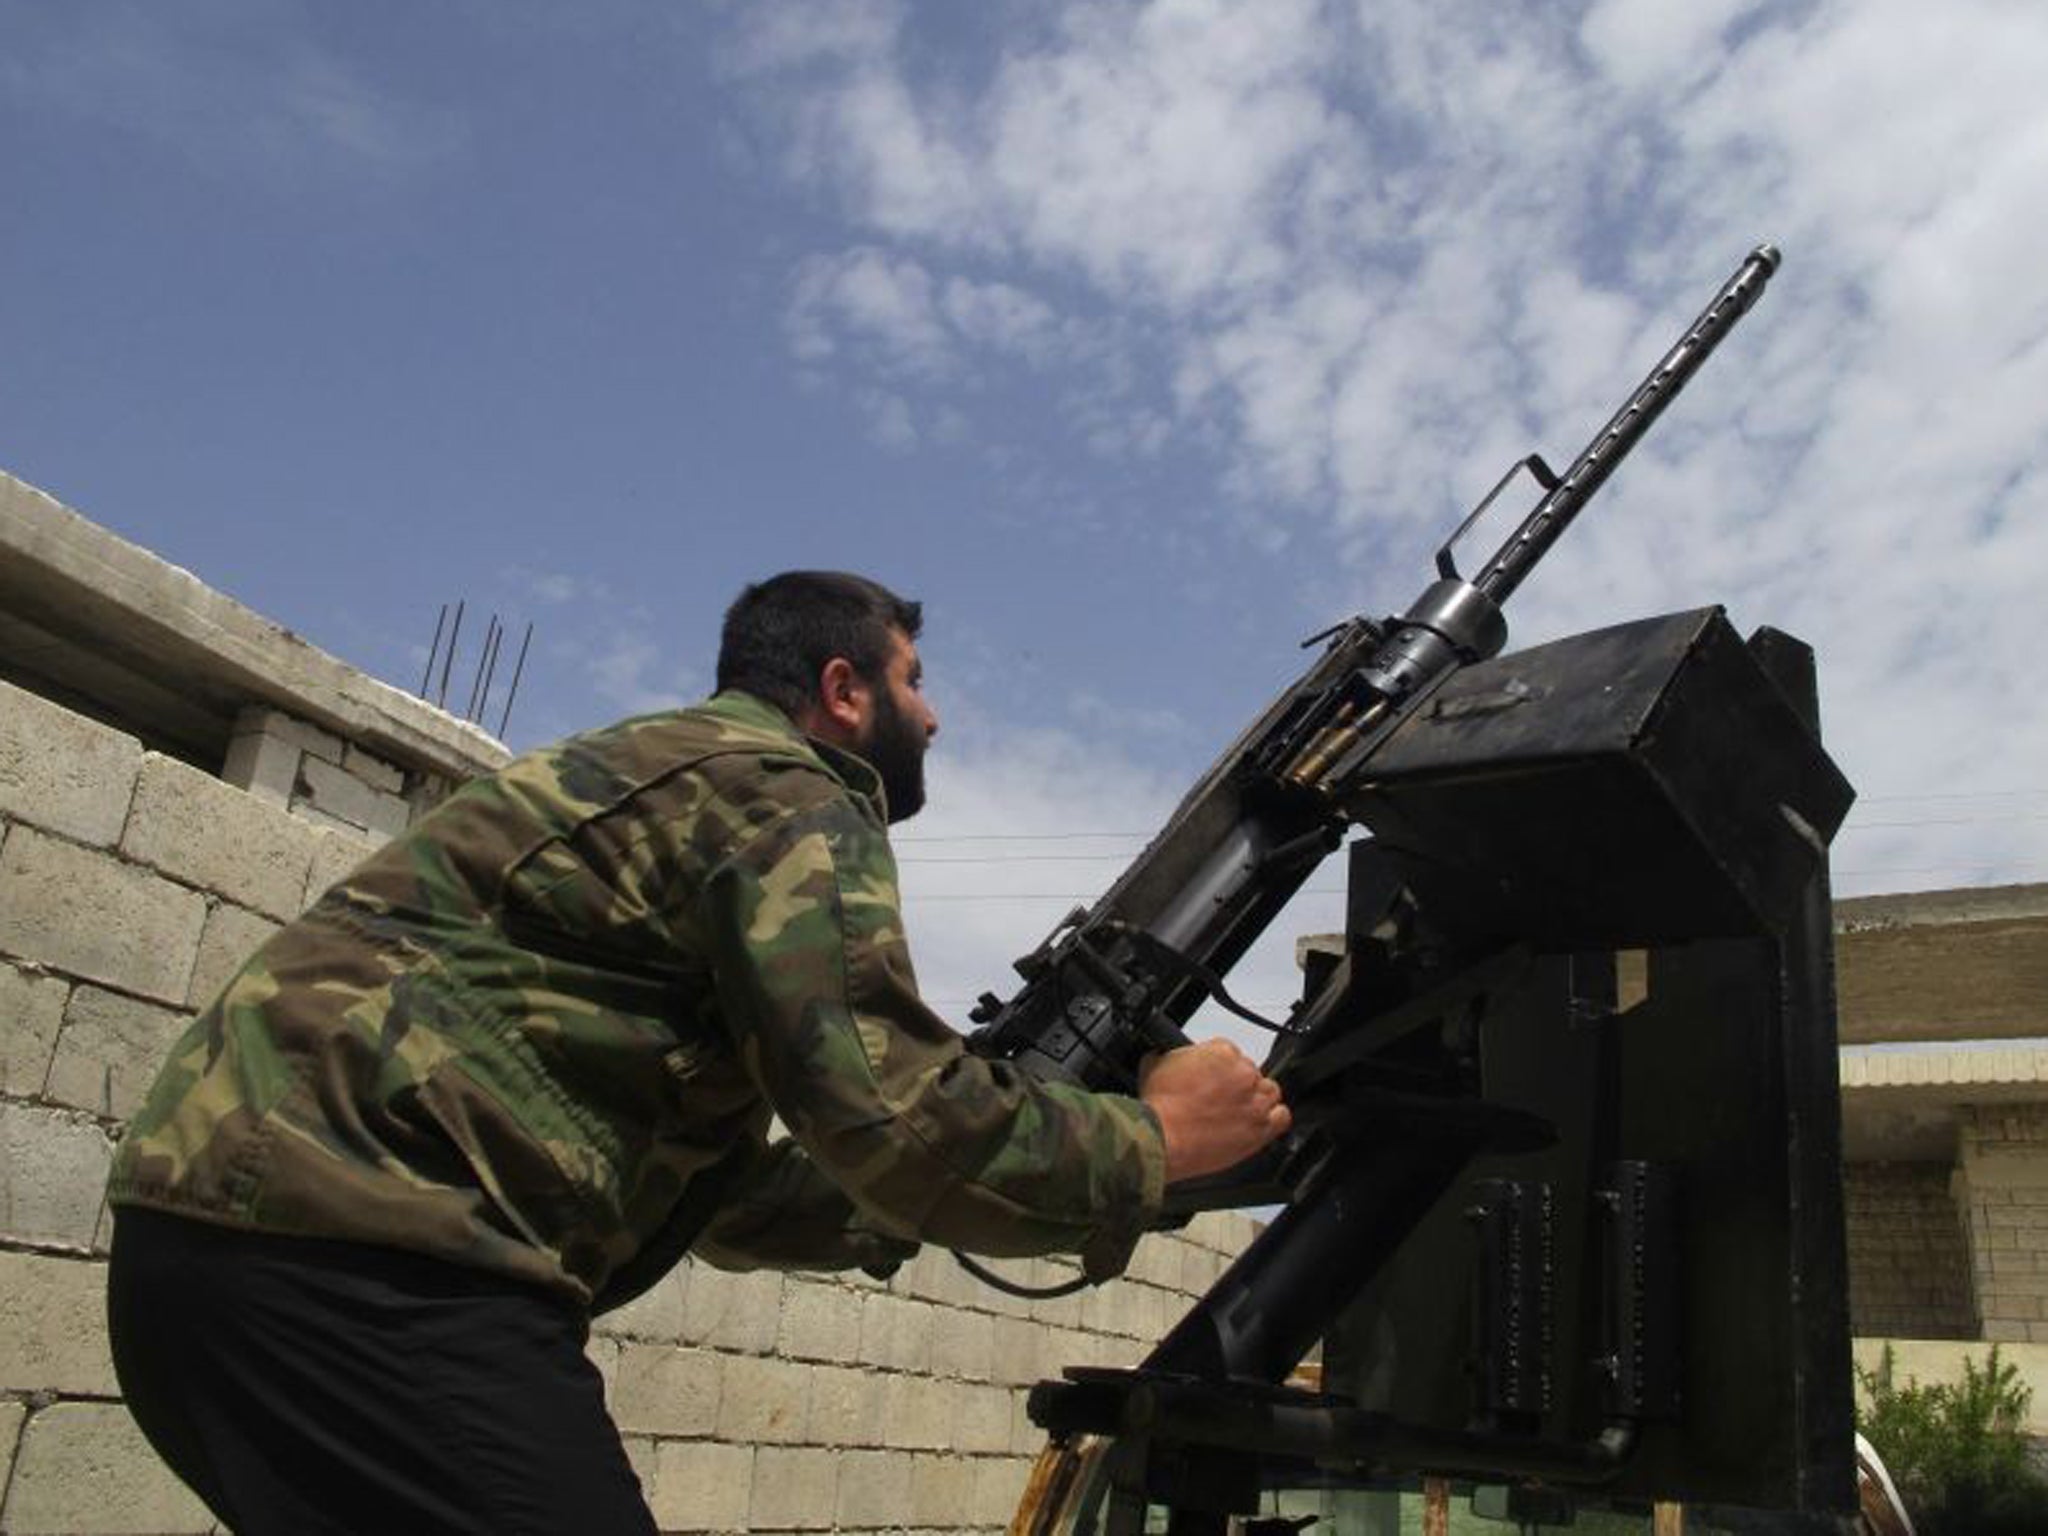 A Free Syrian Army fighter takes position by pointing an artillery weapon towards the sky in Idlib